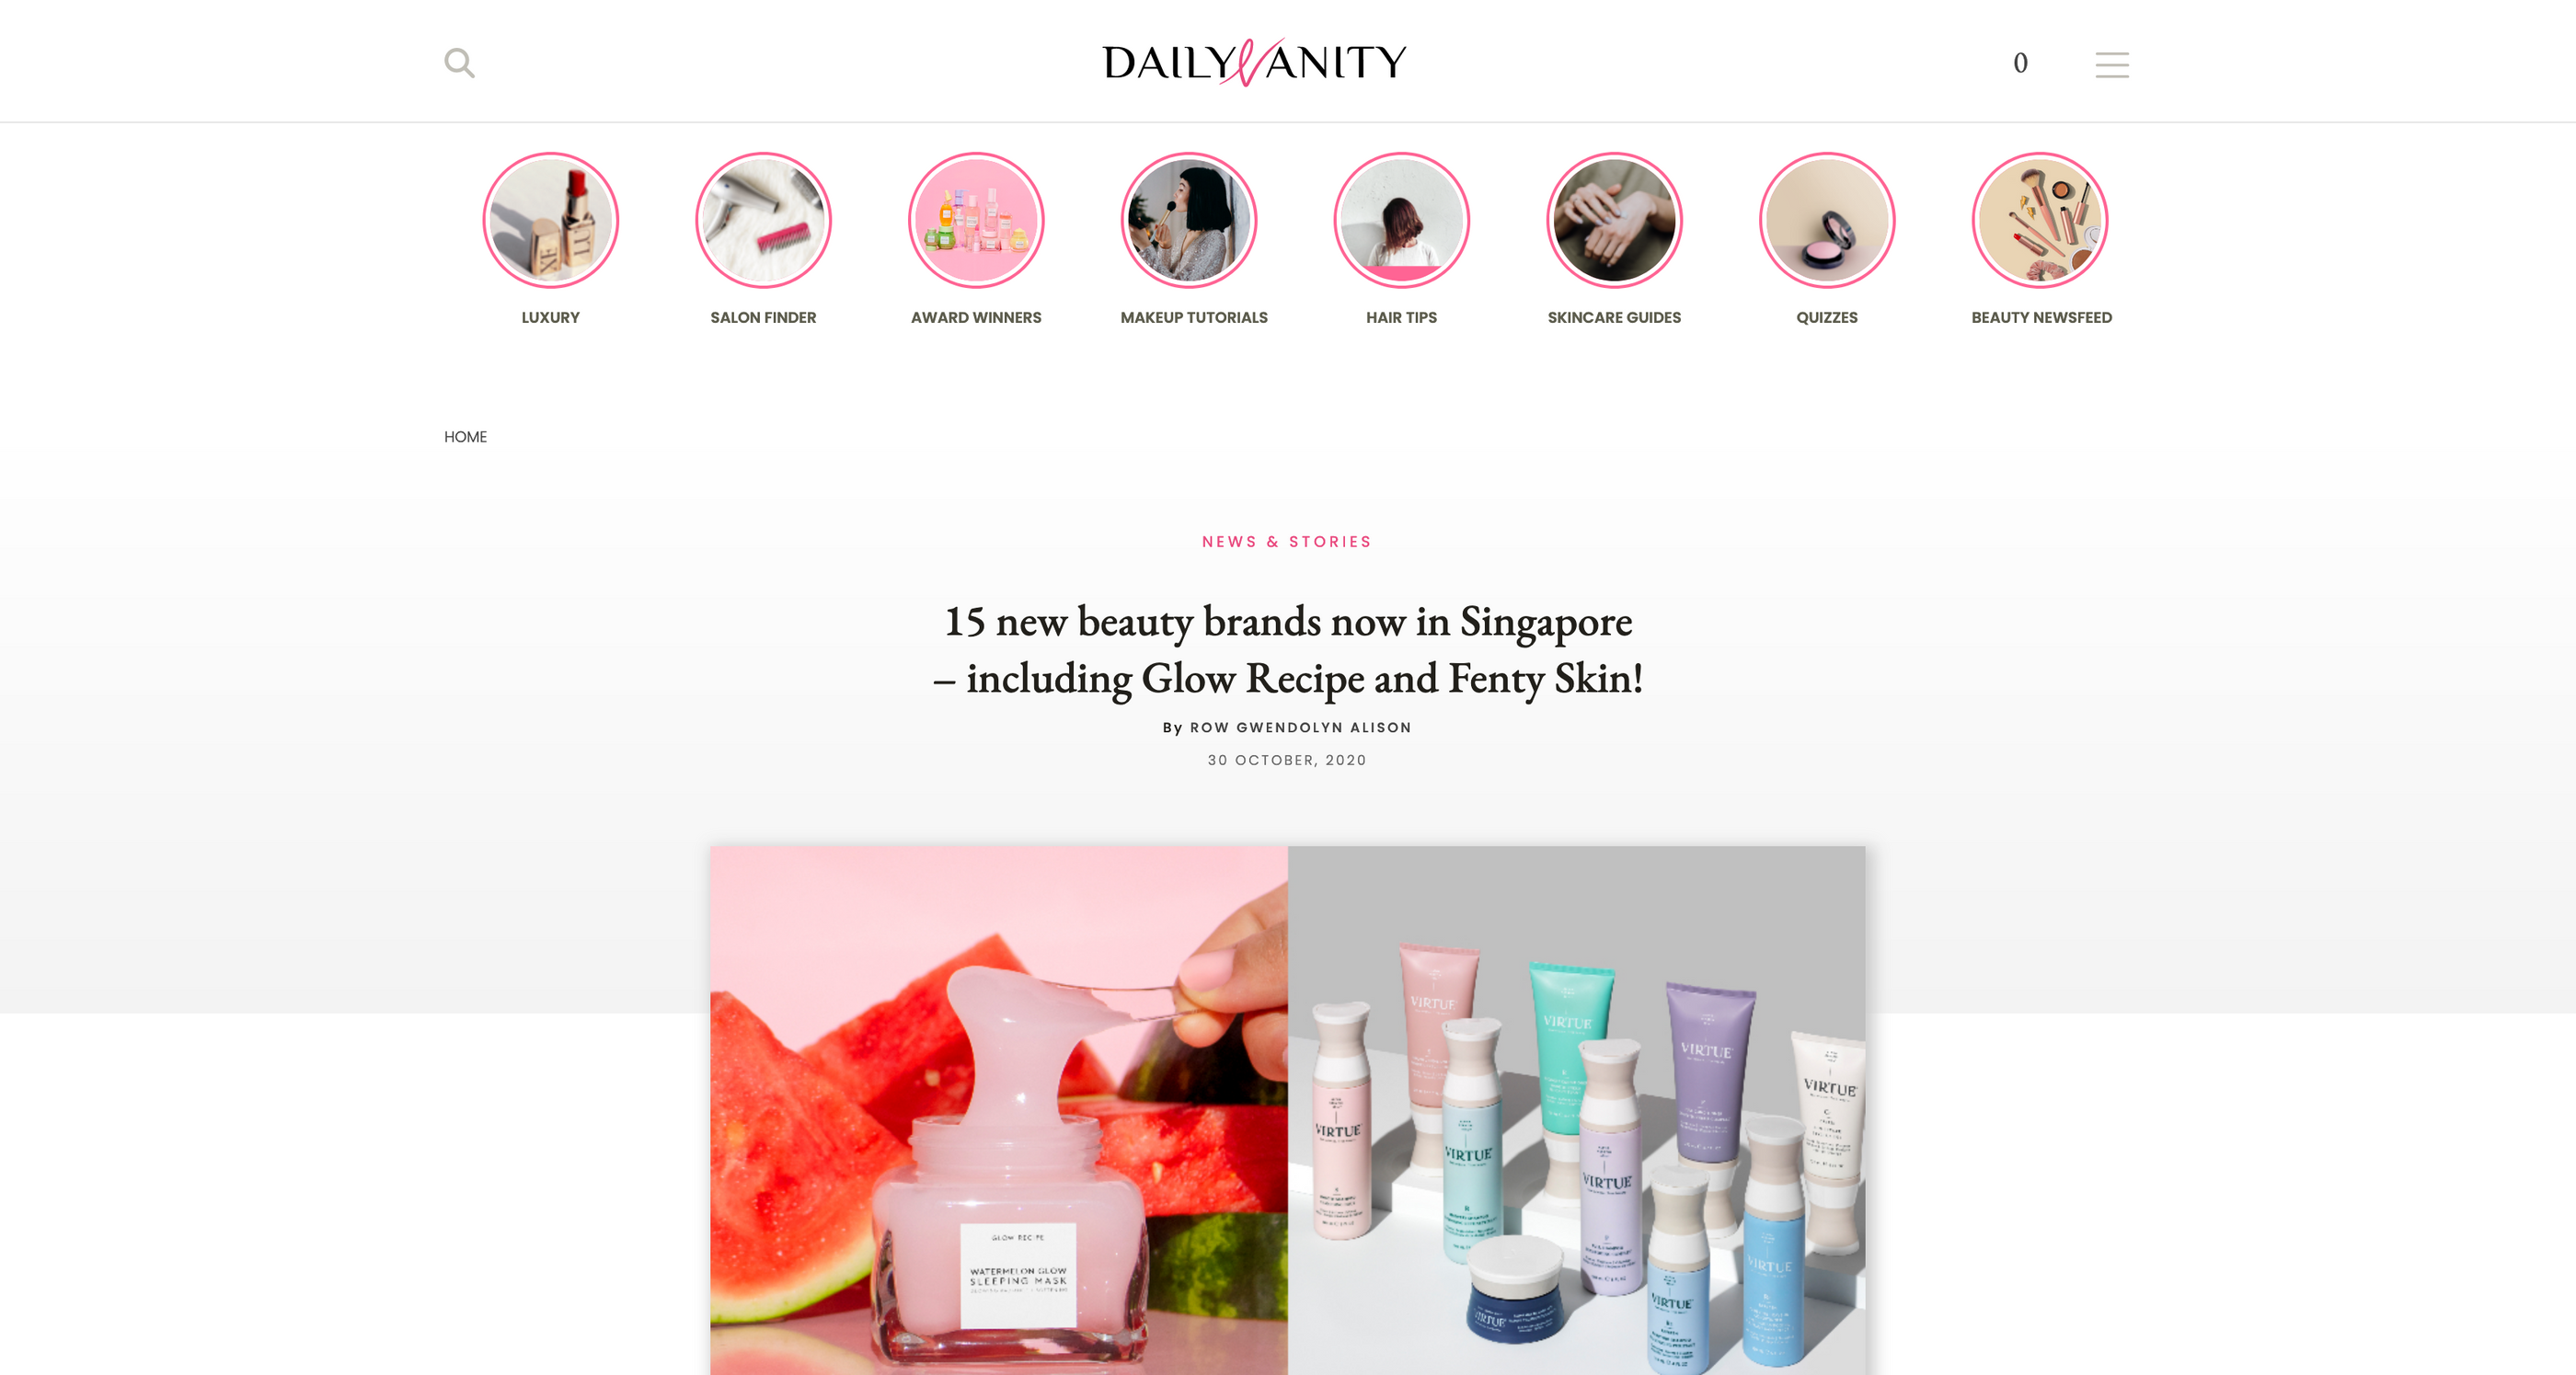 15 New Beauty Brands Now in Singapore by Daily Vanity